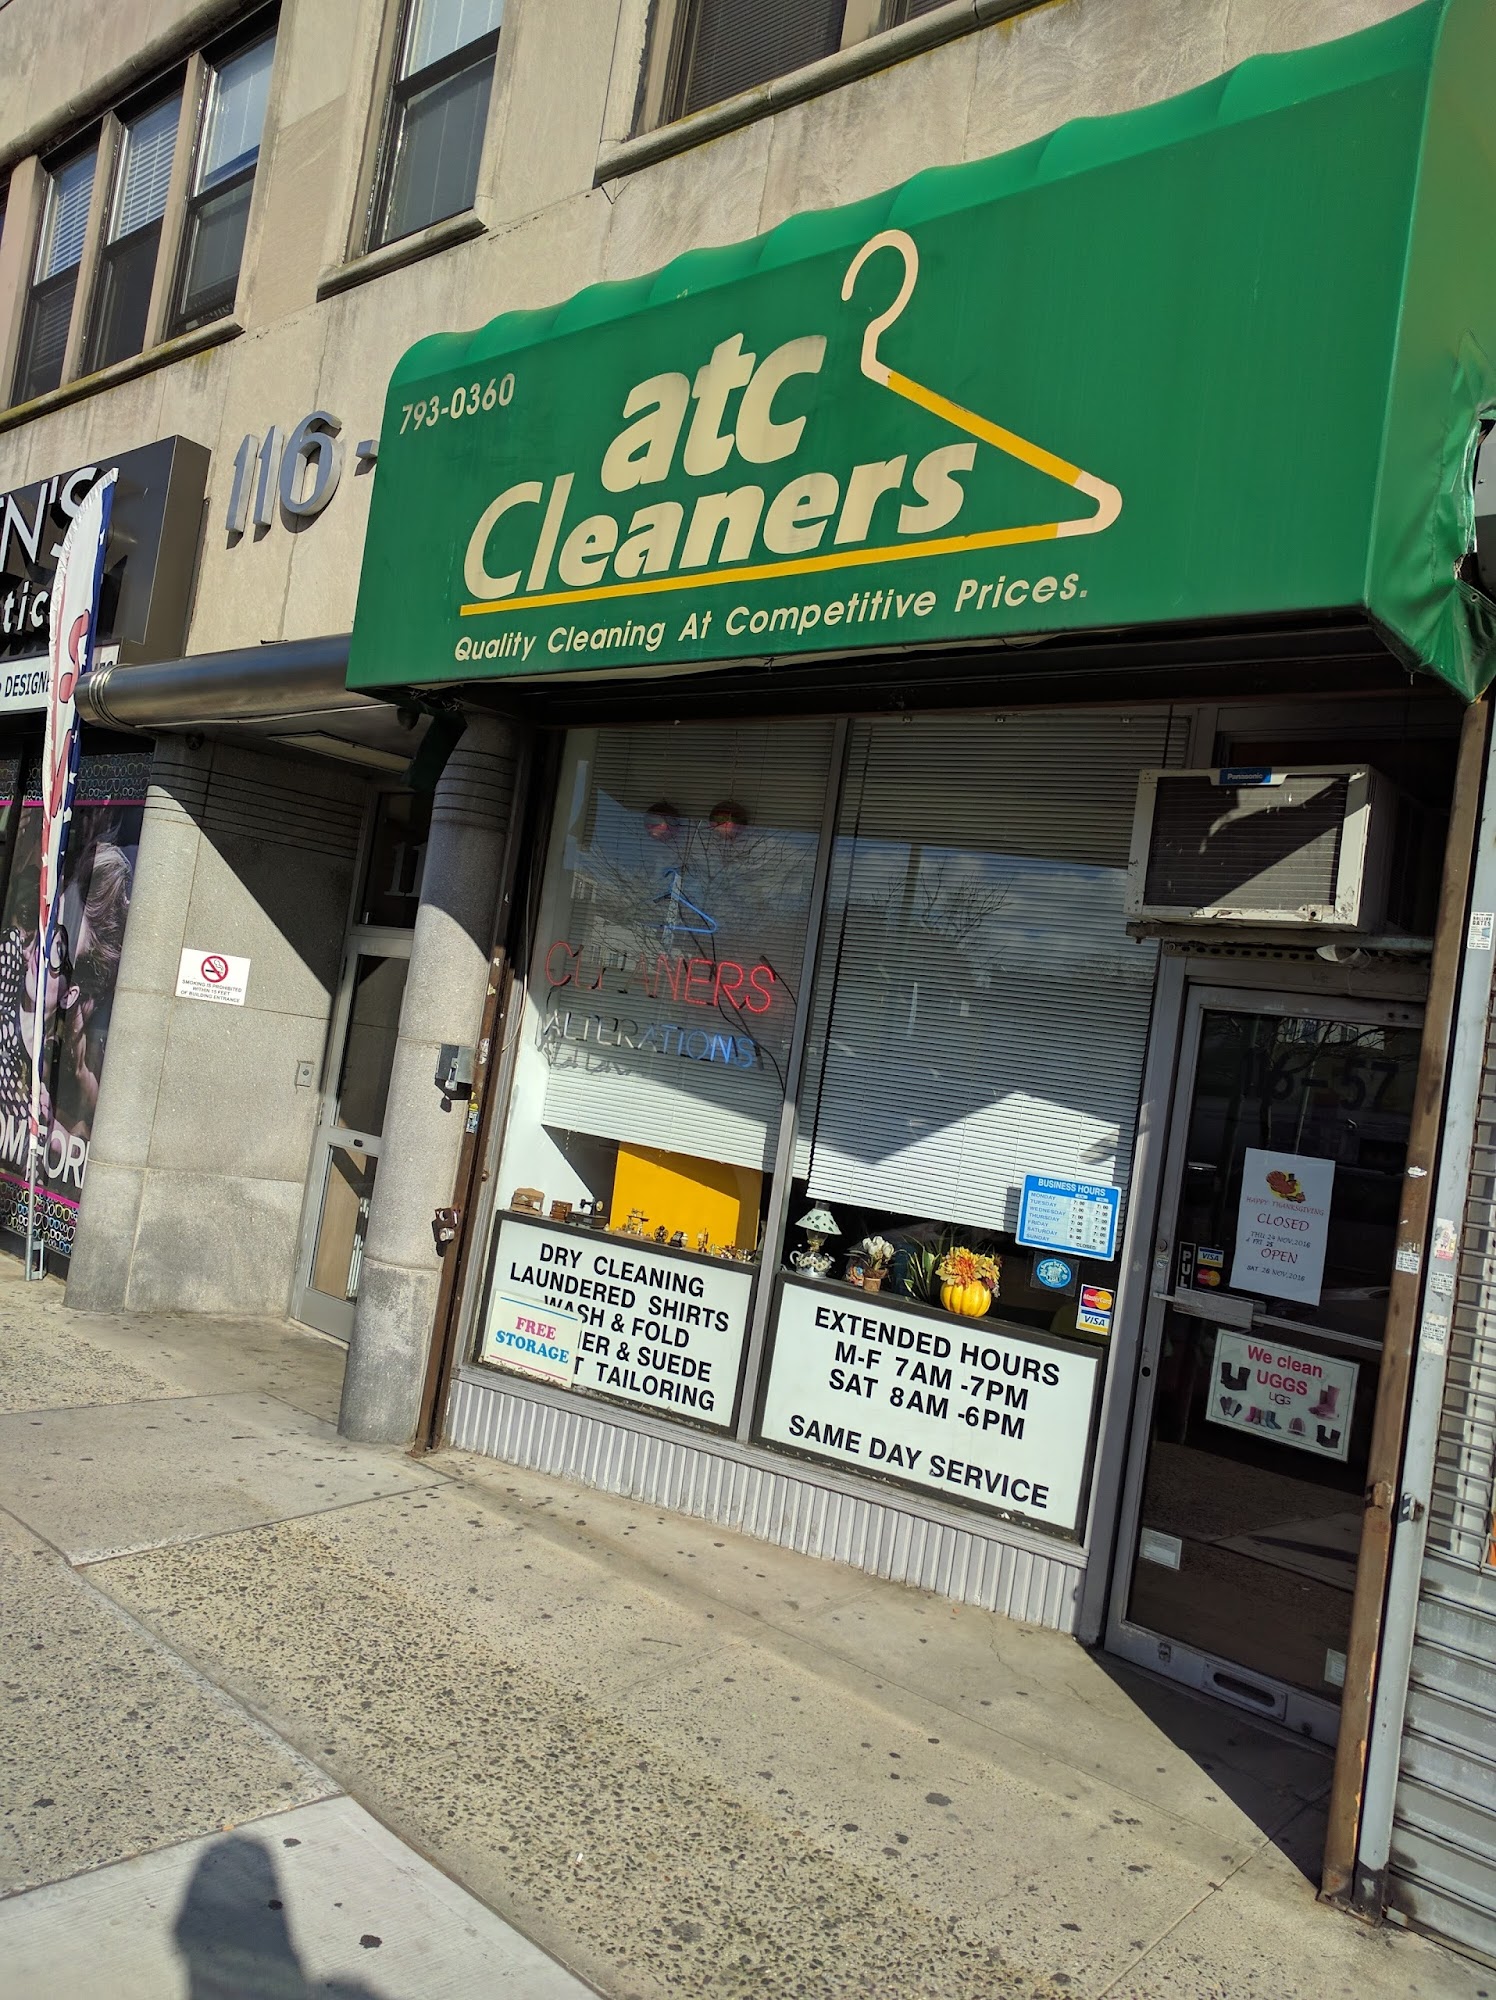 ATC Cleaners